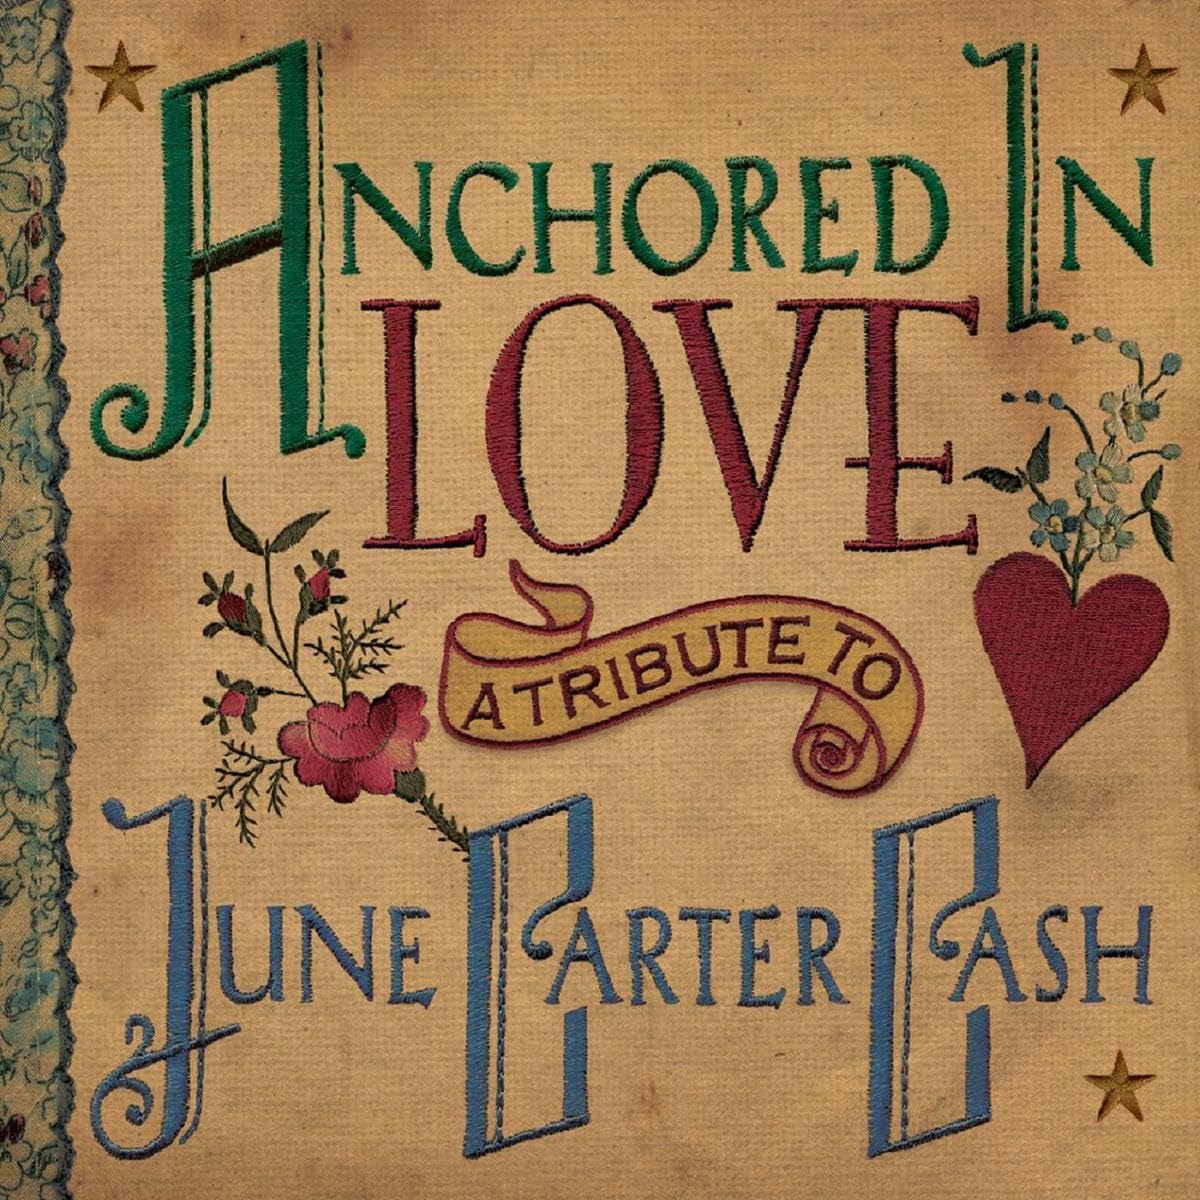 Various Artists - Anchored In Love - A Tribute To Jun Carter Cash